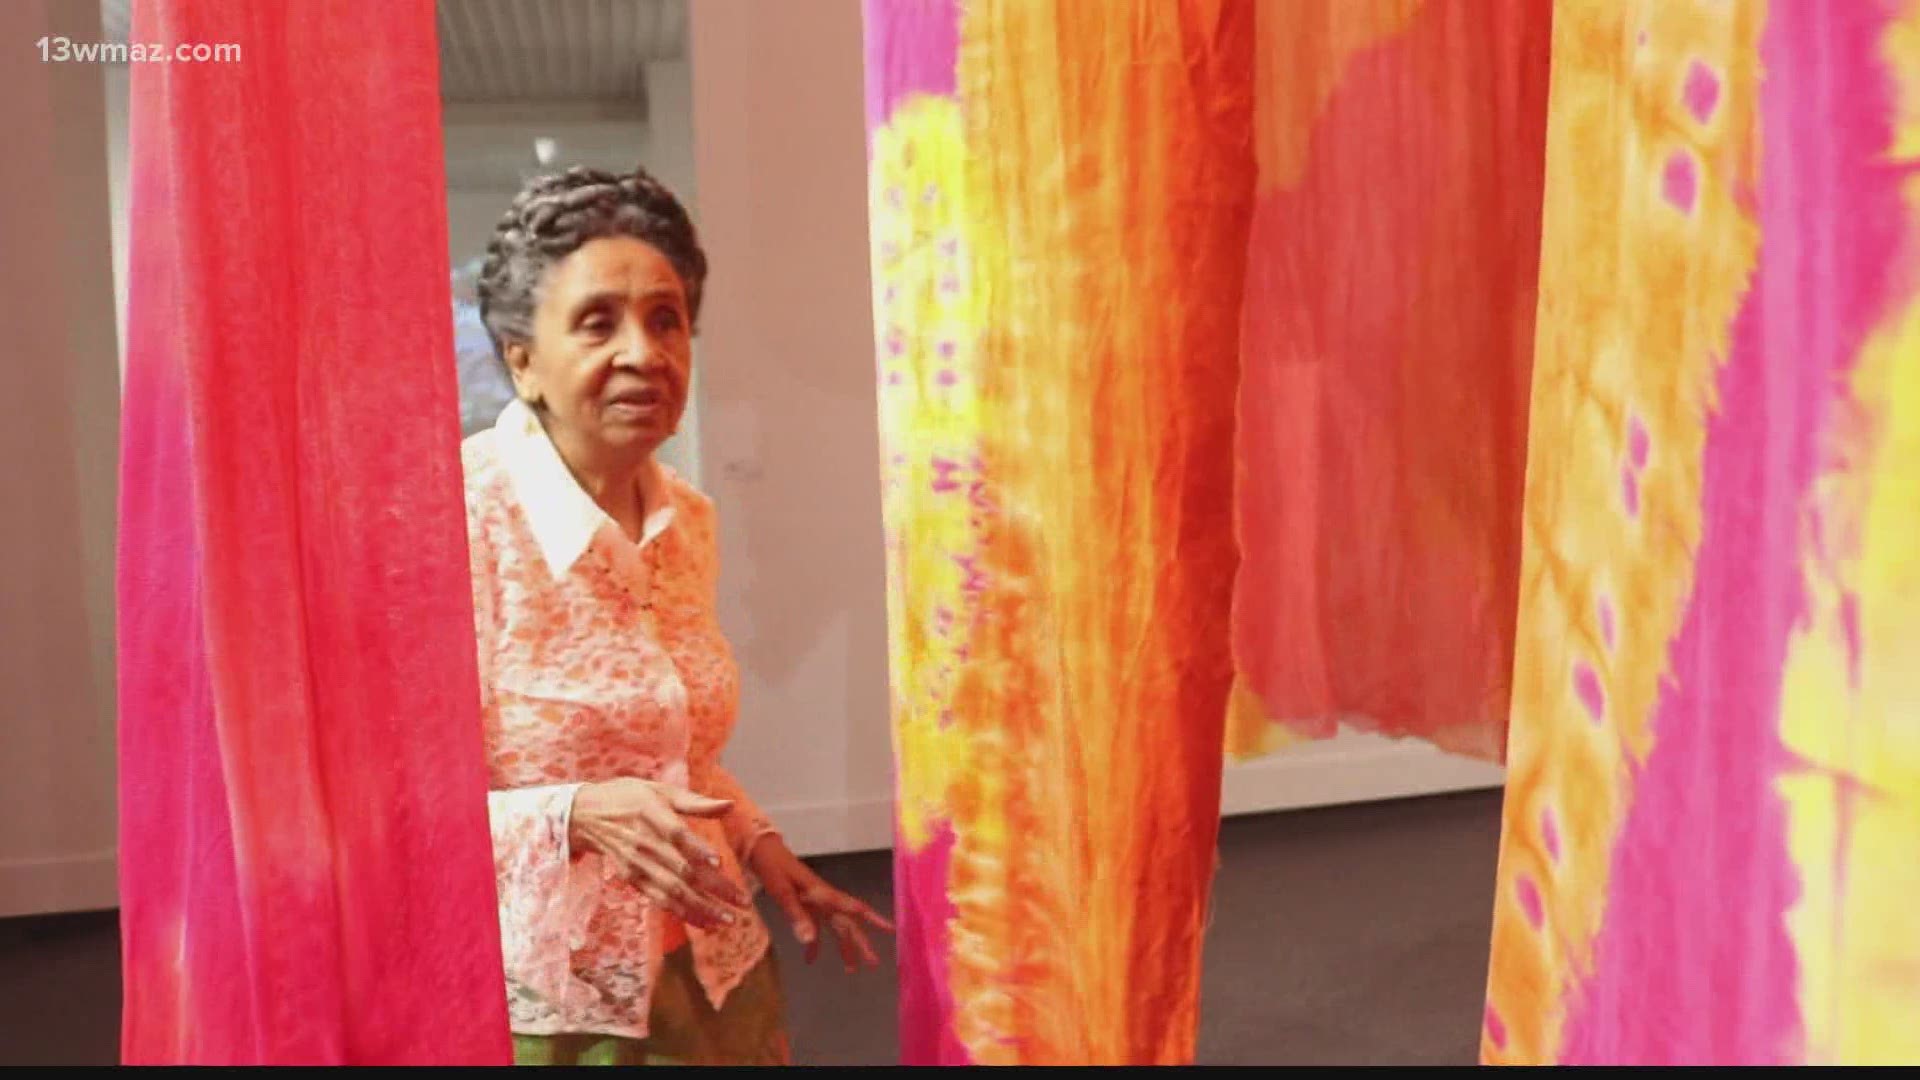 Textile artist Wini McQueen has used fabric to explore issues of race, class, and gender for over fifty years